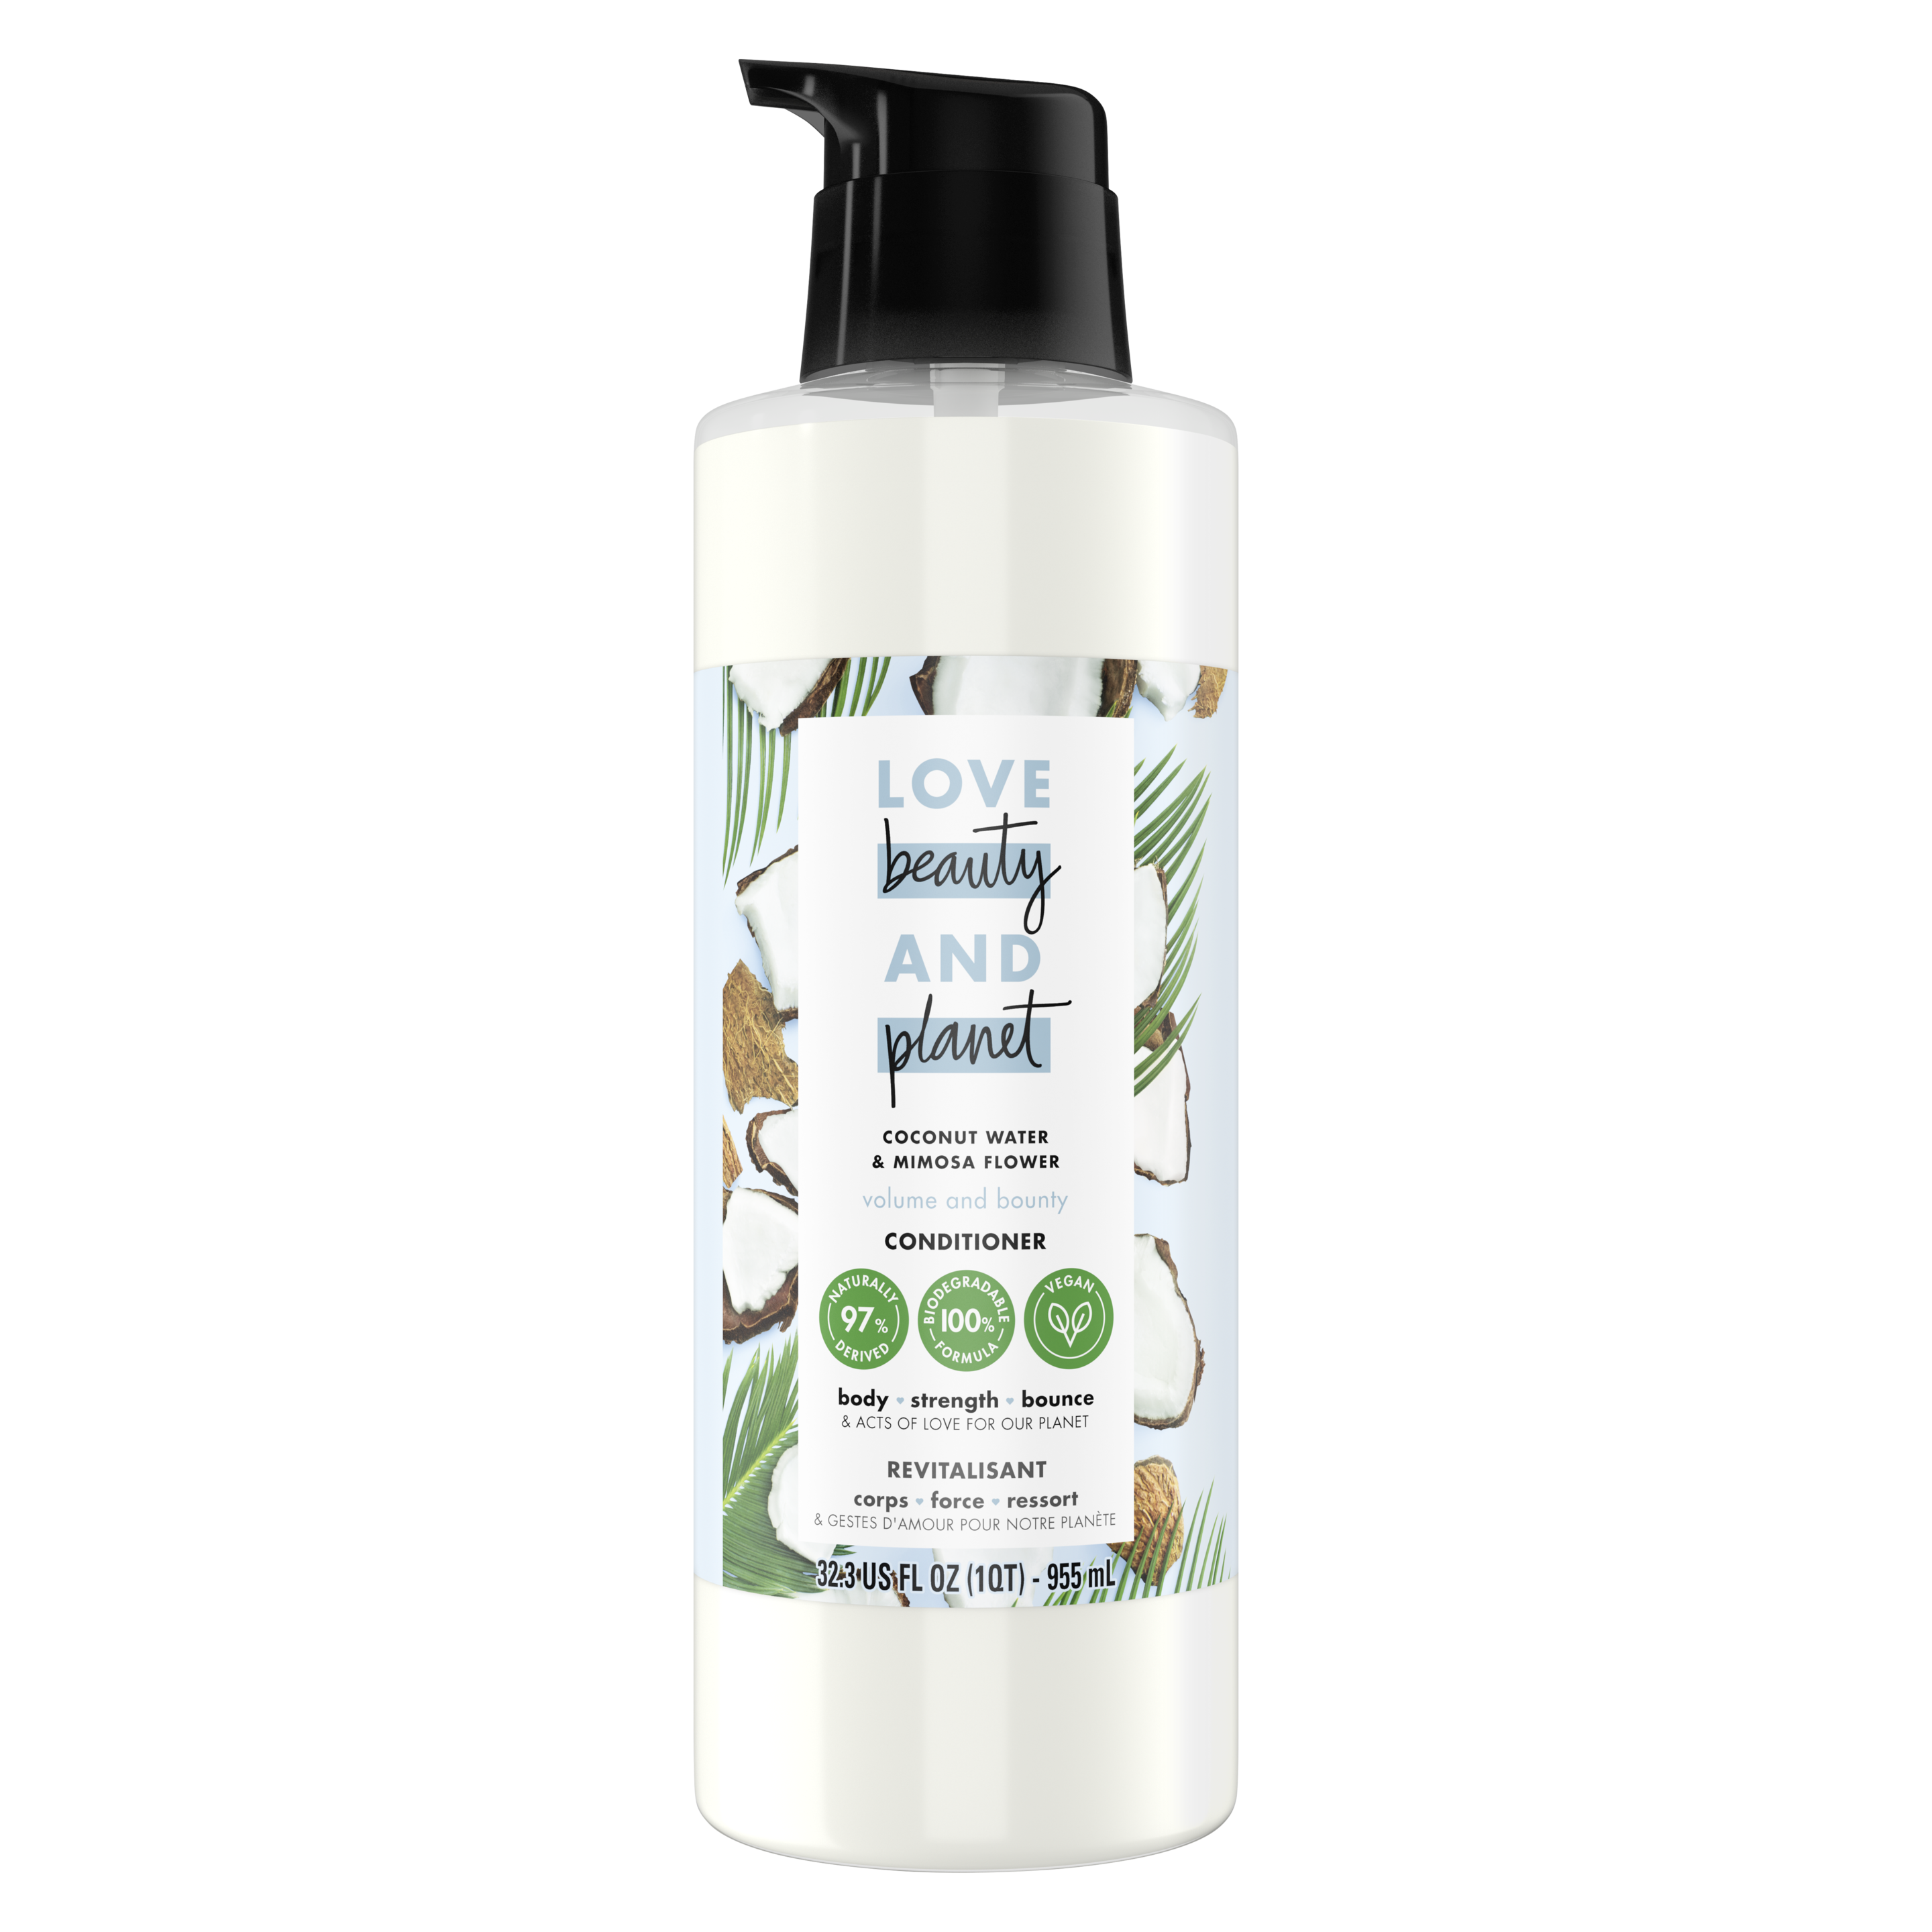 coconut water & mimosa flower conditioner refill